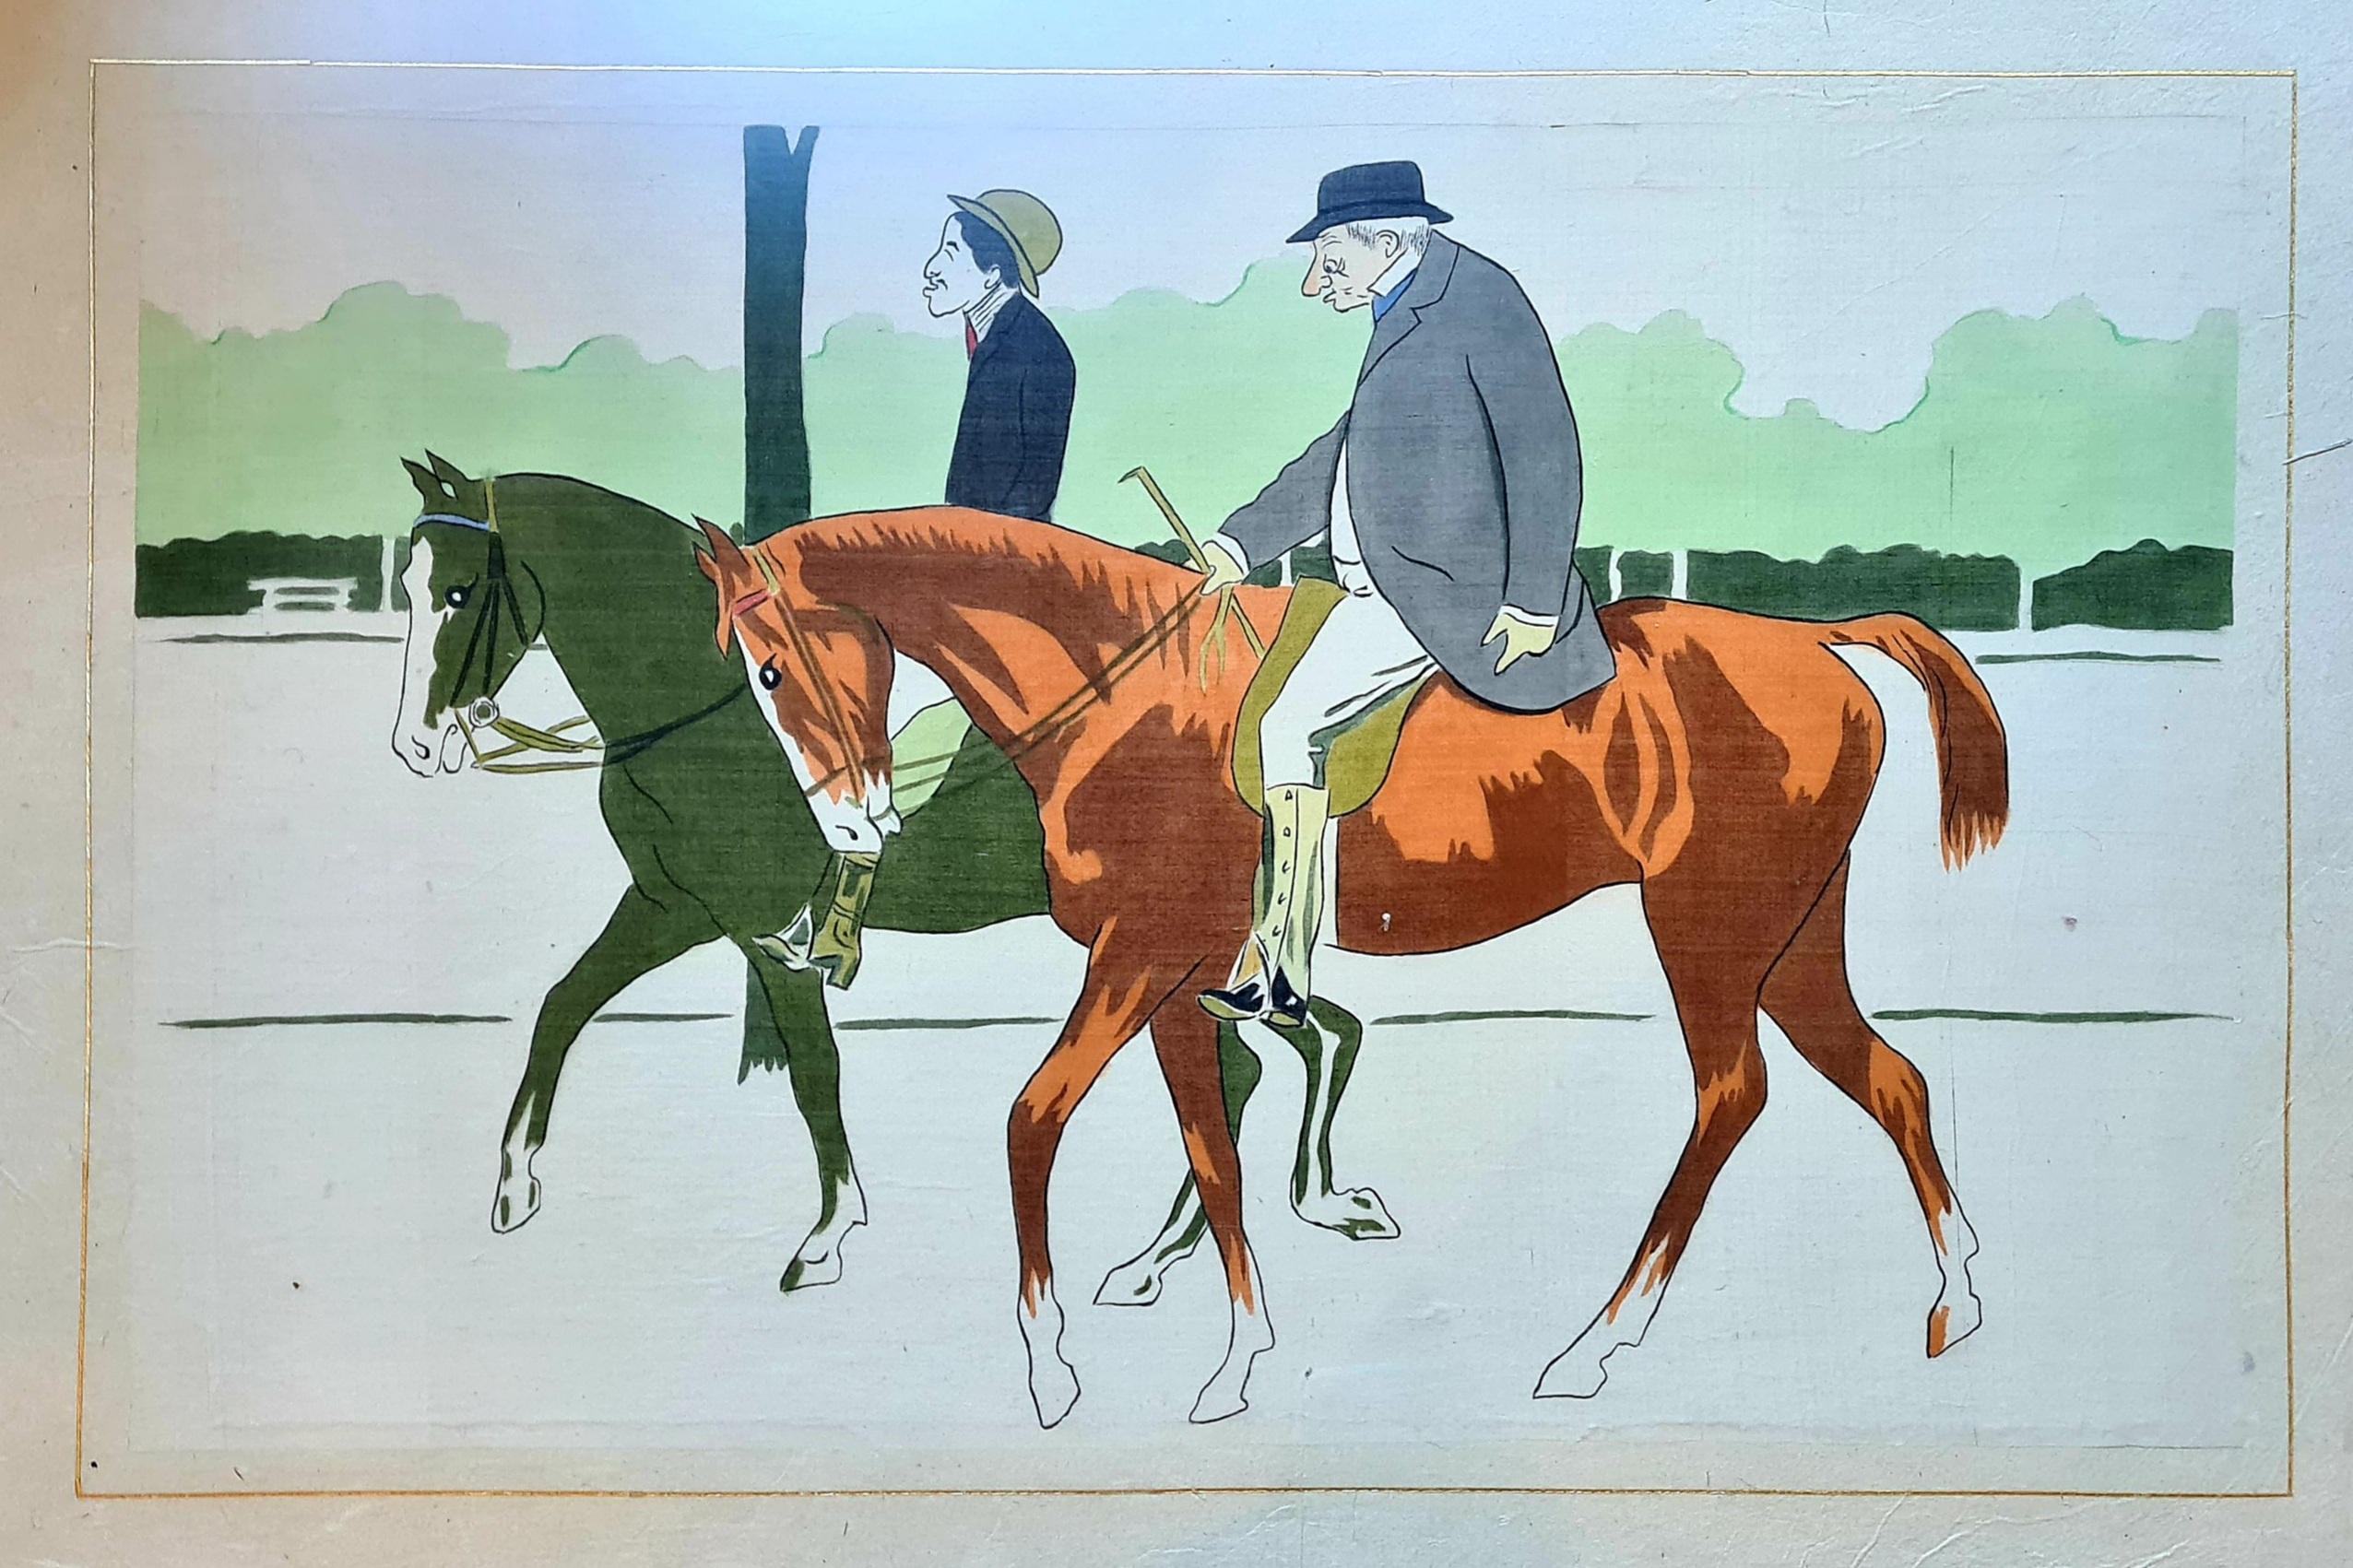 La Roche Laffitte Animal Art - A Ride In The Park, Large Goauche and Watercolour Caricature On Handmade Paper